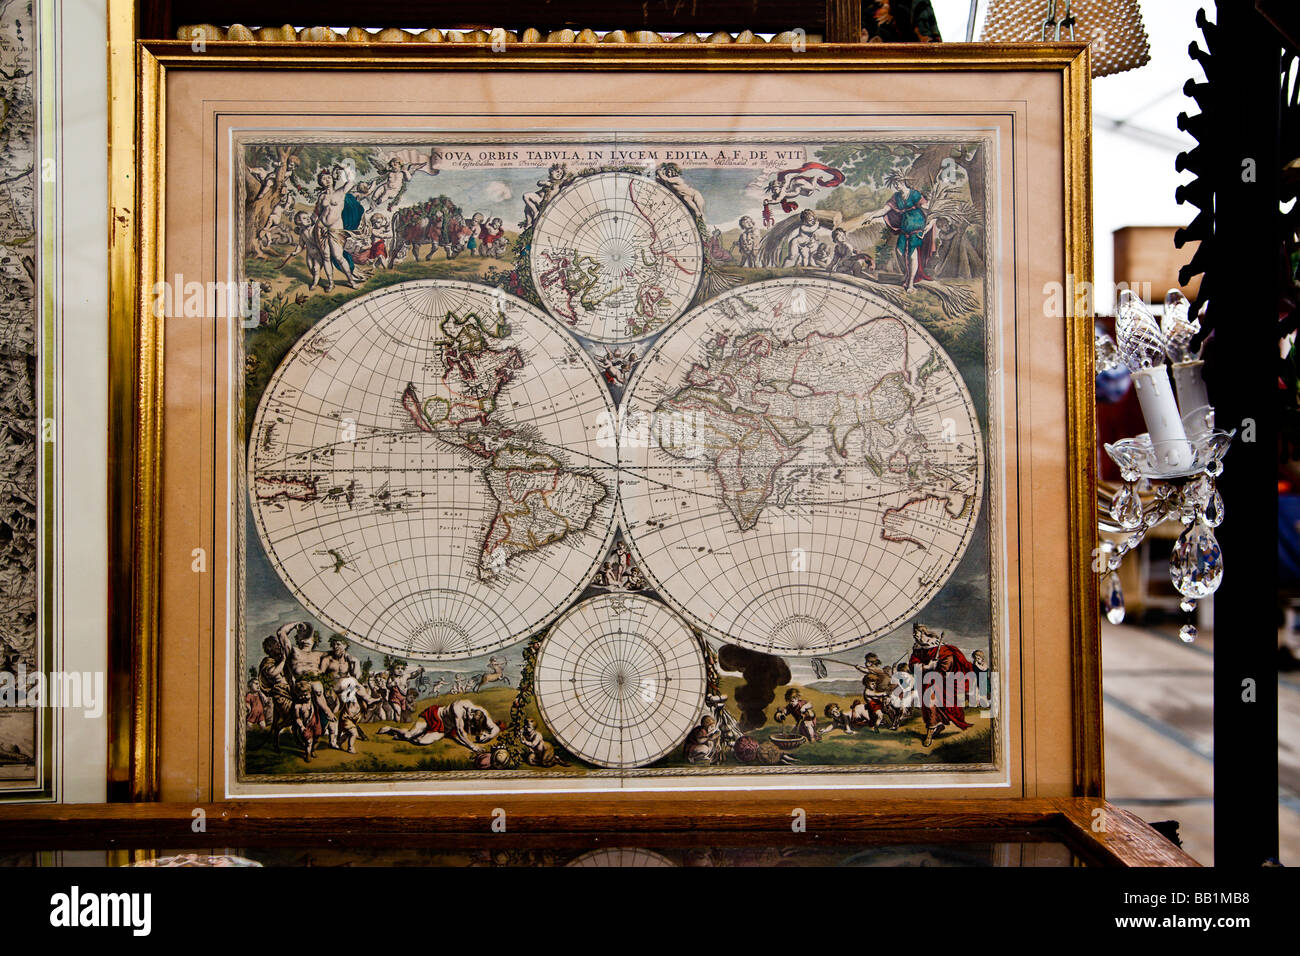 Antique map in German at the antique market Neuchatel Switzerland. Charles Lupica Stock Photo